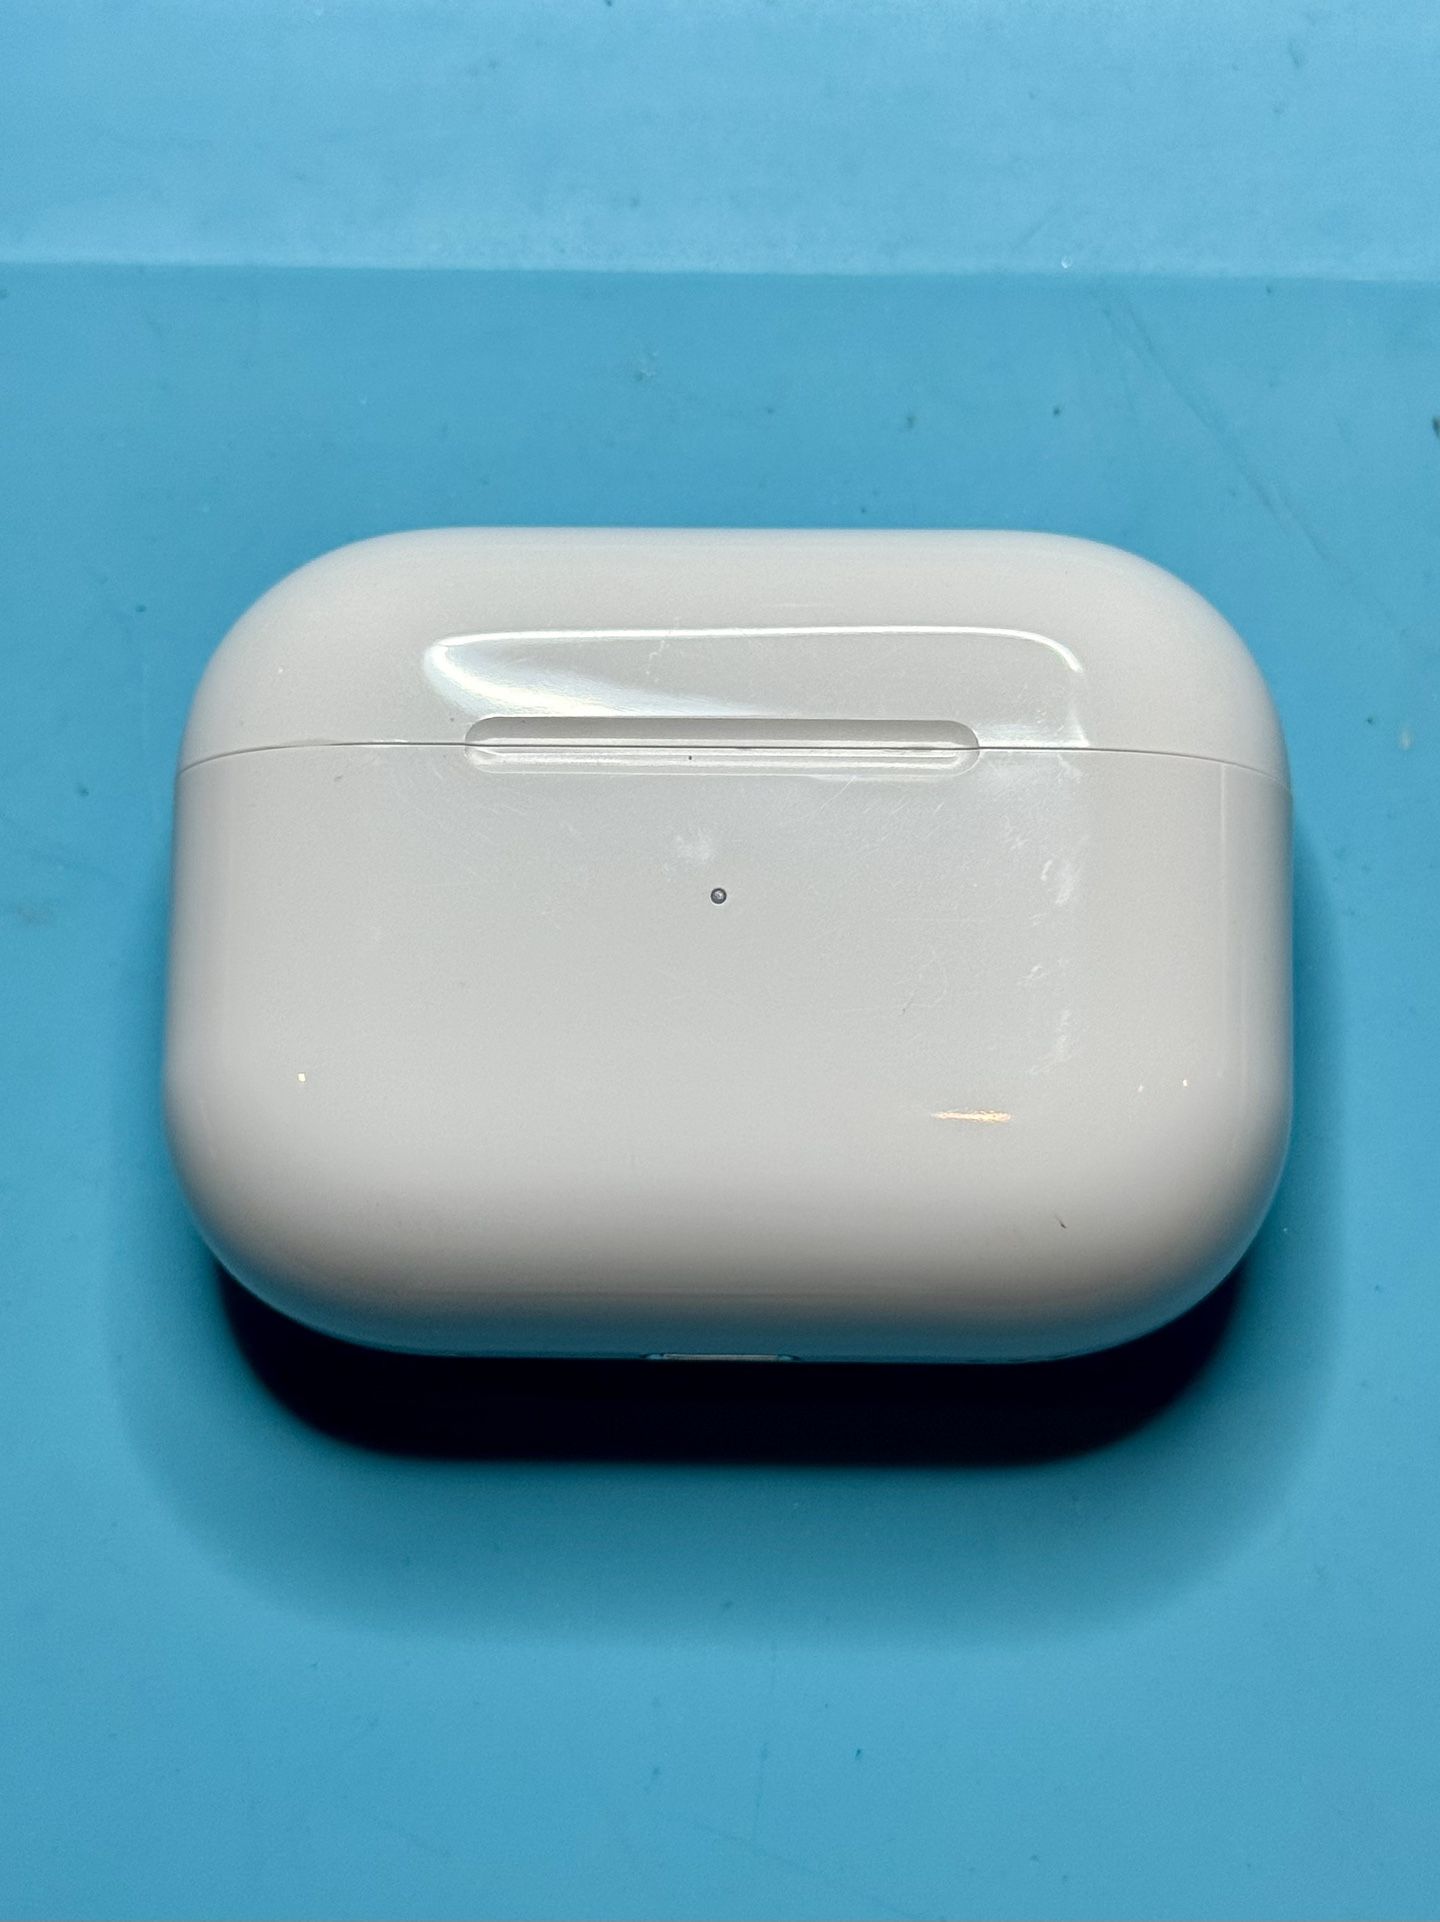 Real Genuine Apple Airpods Pro 2